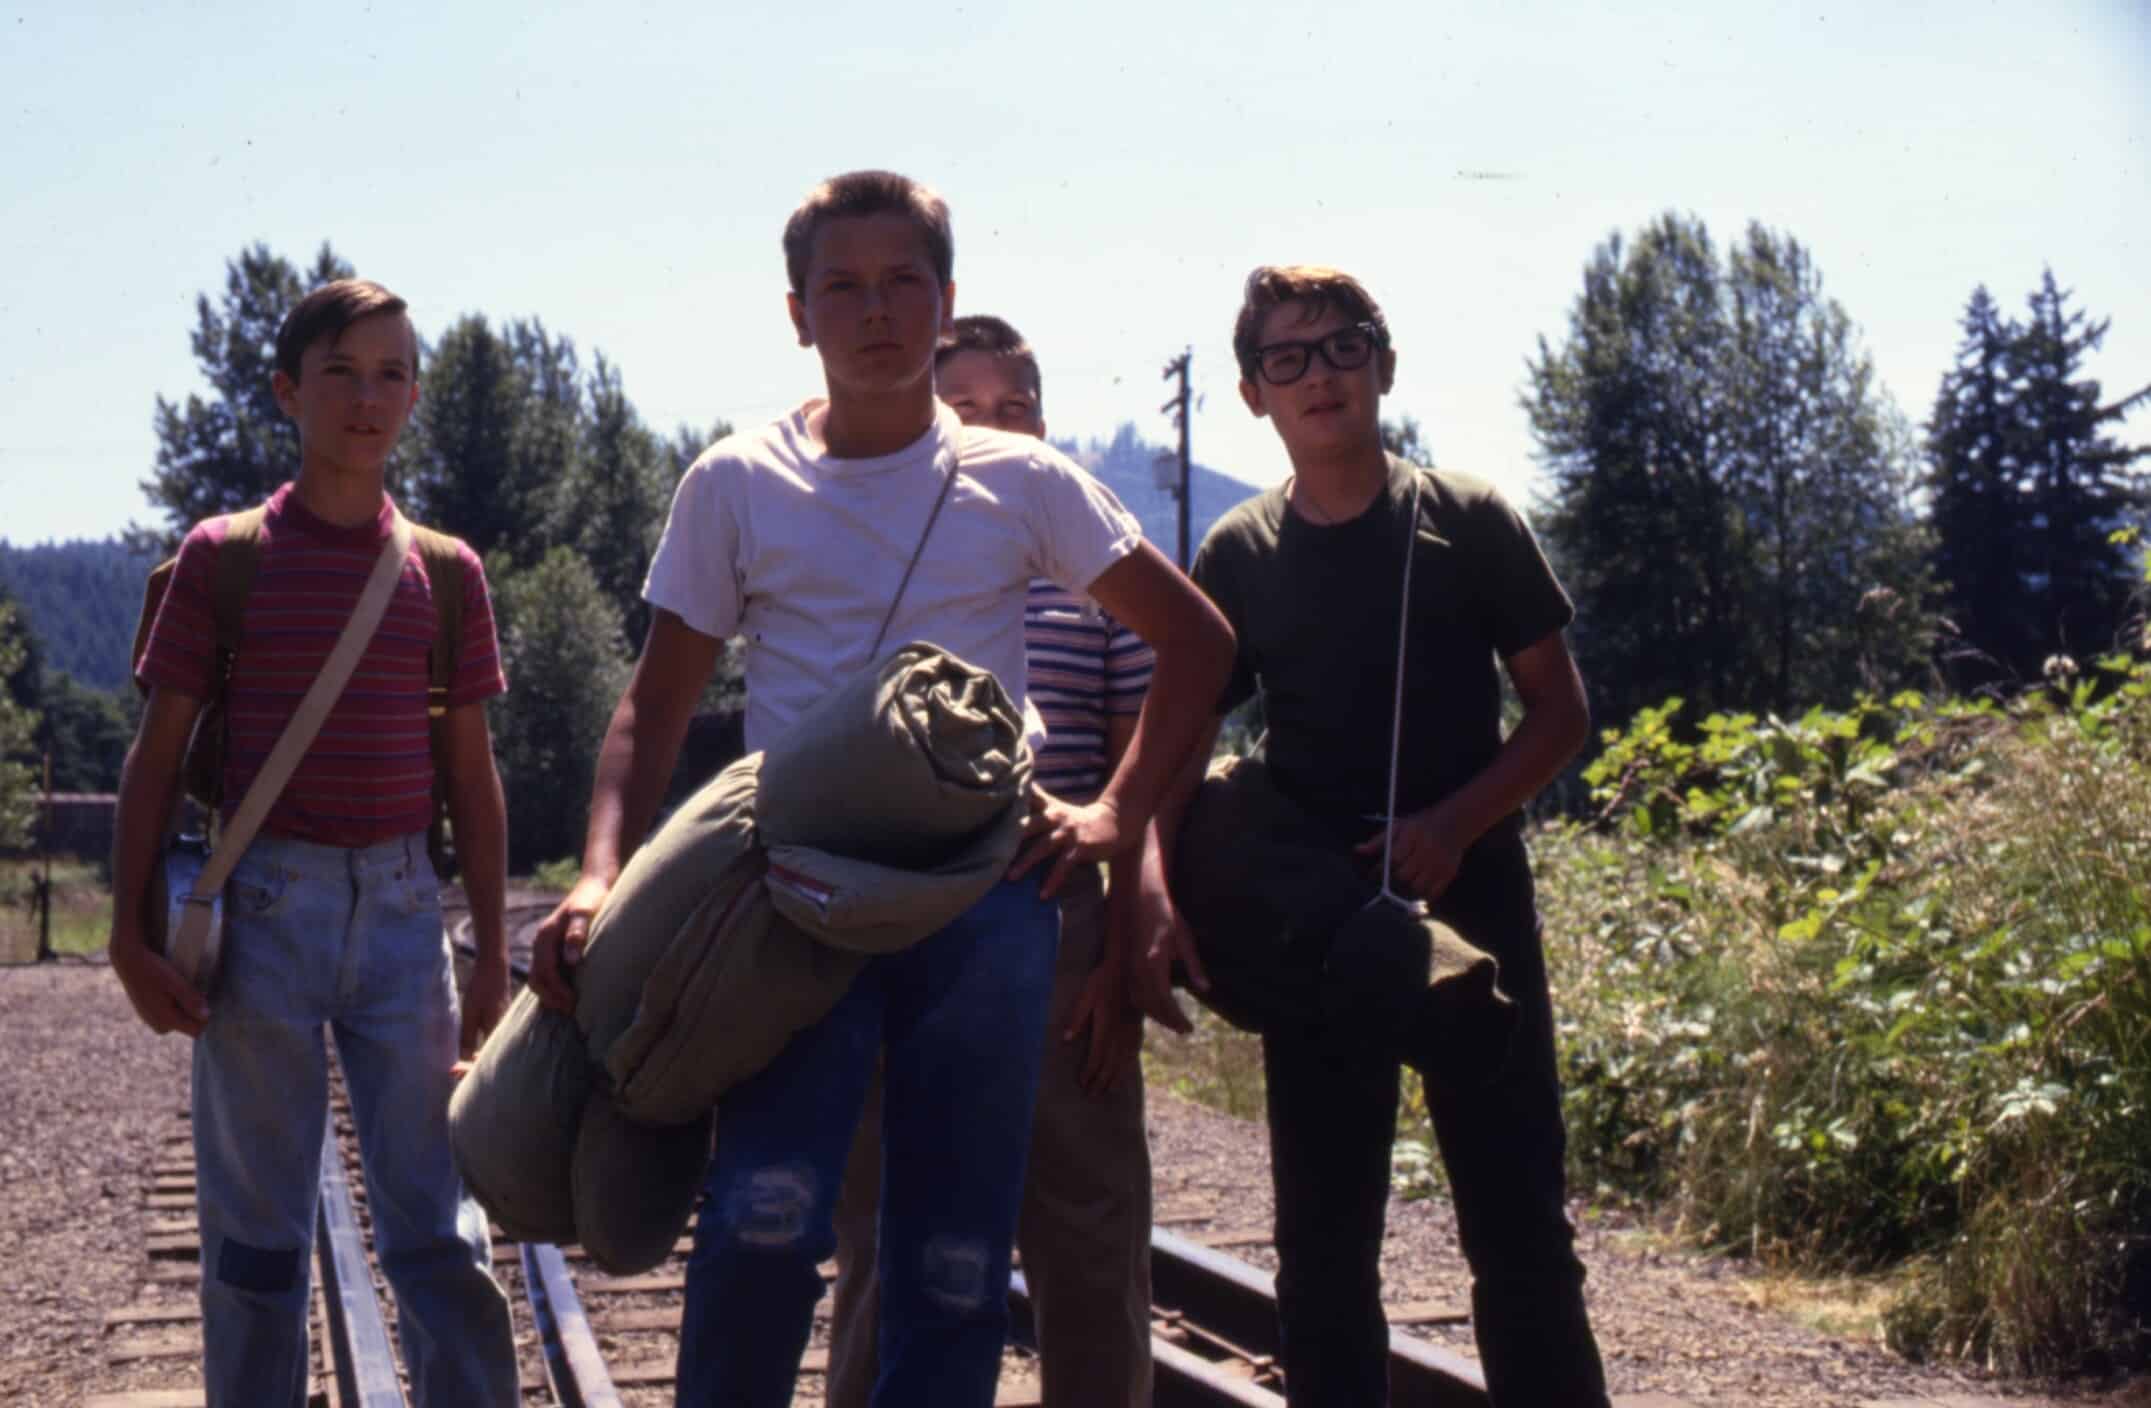 Young boys walk on a railroad track in this image from Act III Productions.